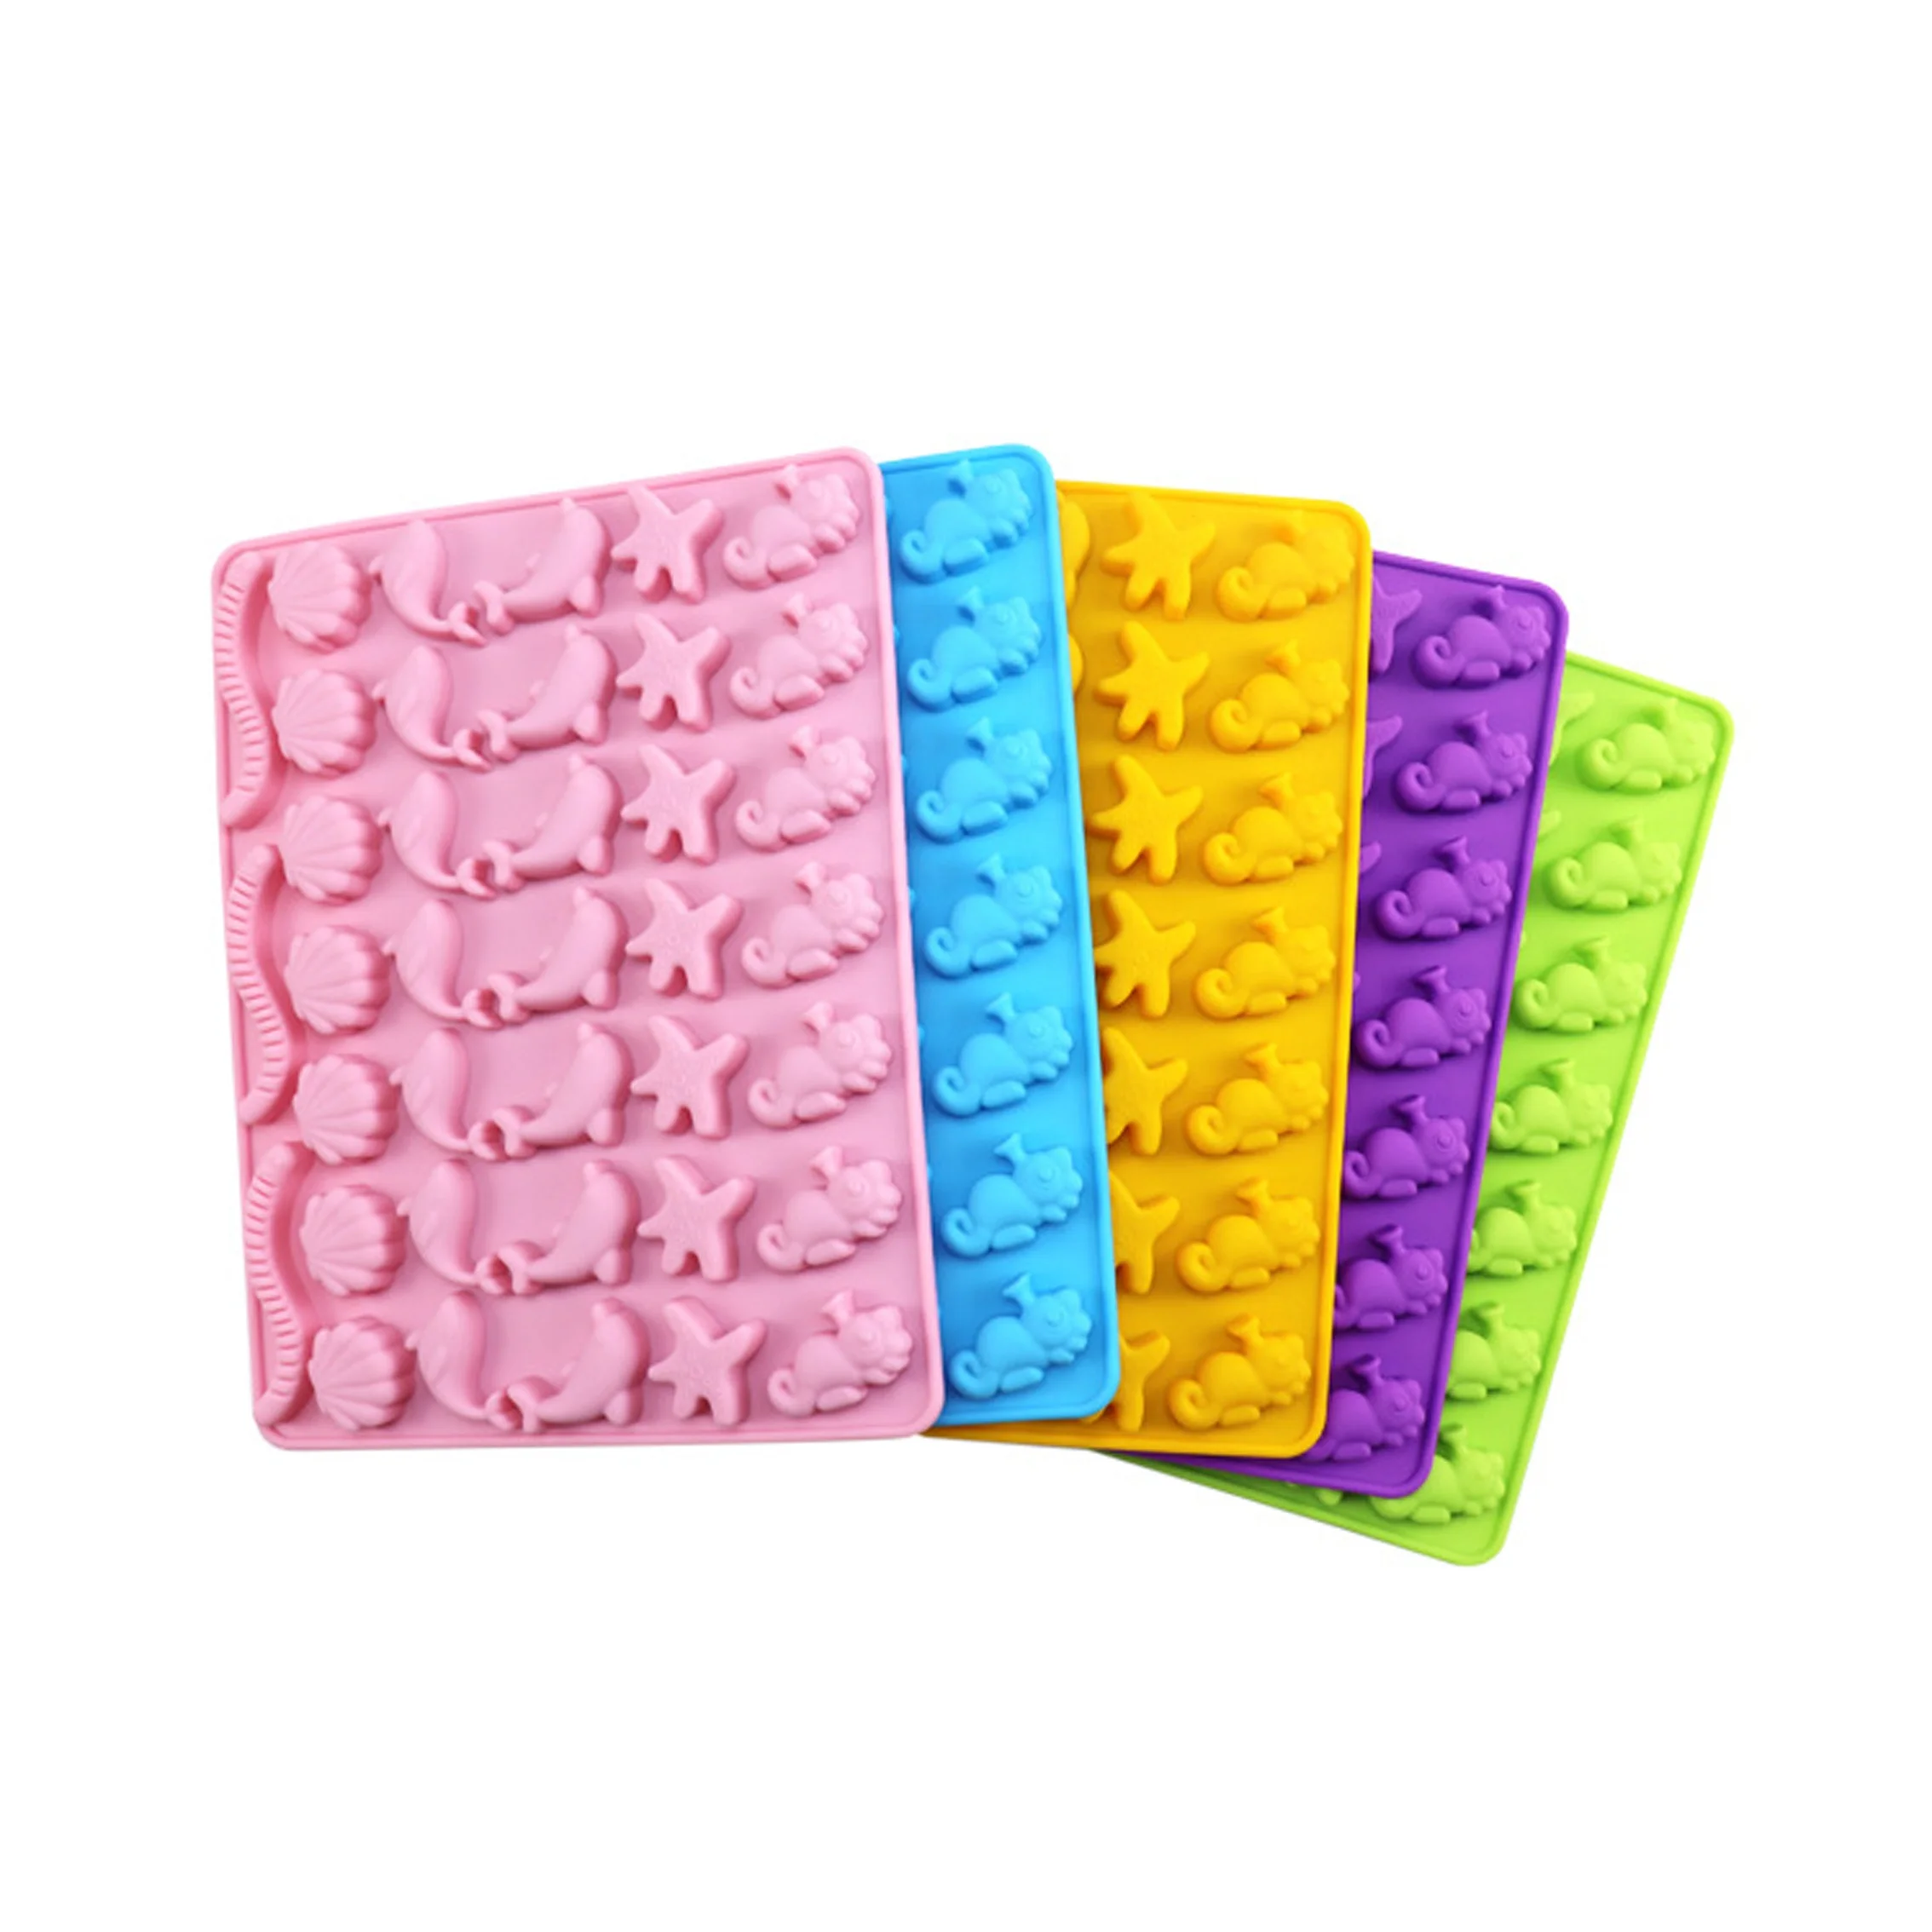 

2021 New Marine Fondant Silicone Mold Whale Seashell Starfish Seahorse Coral Dolphin Dinosaur Shape Silicone Mould, Purple,green,yellow,blue,pink